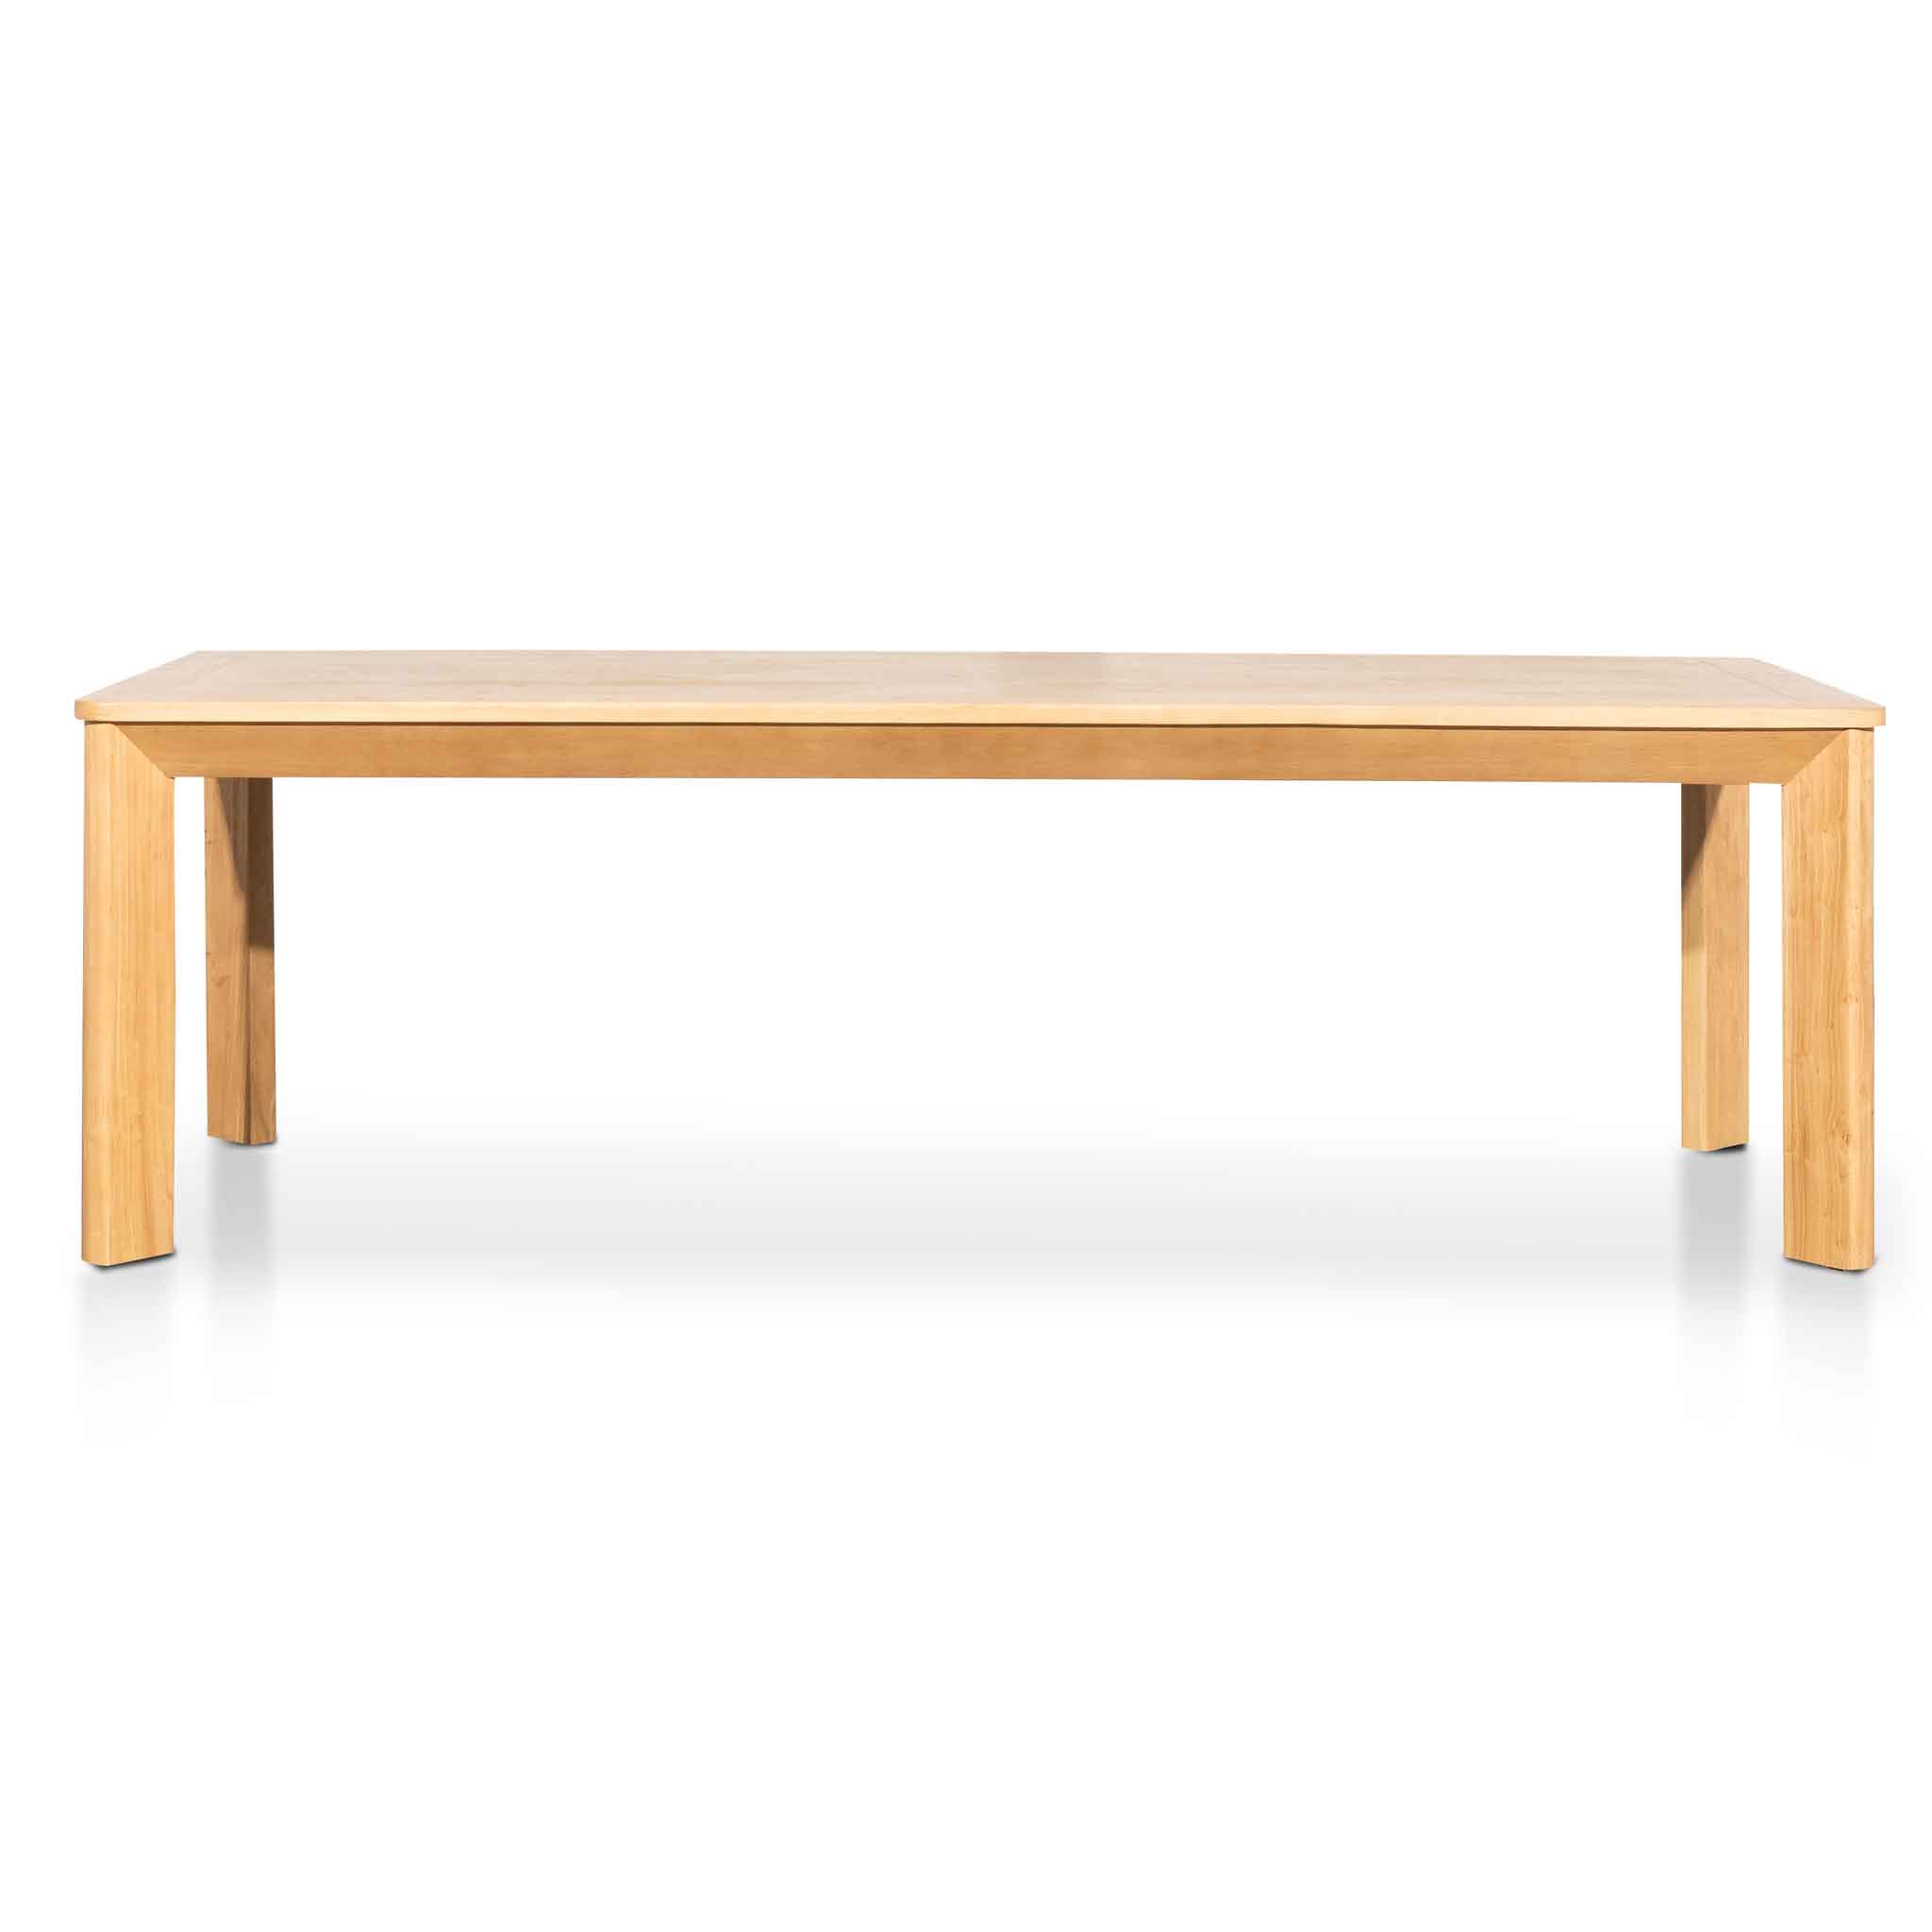 Reese 2.4m Wood Dining Table - Elm Distress Natural - Dining Tables